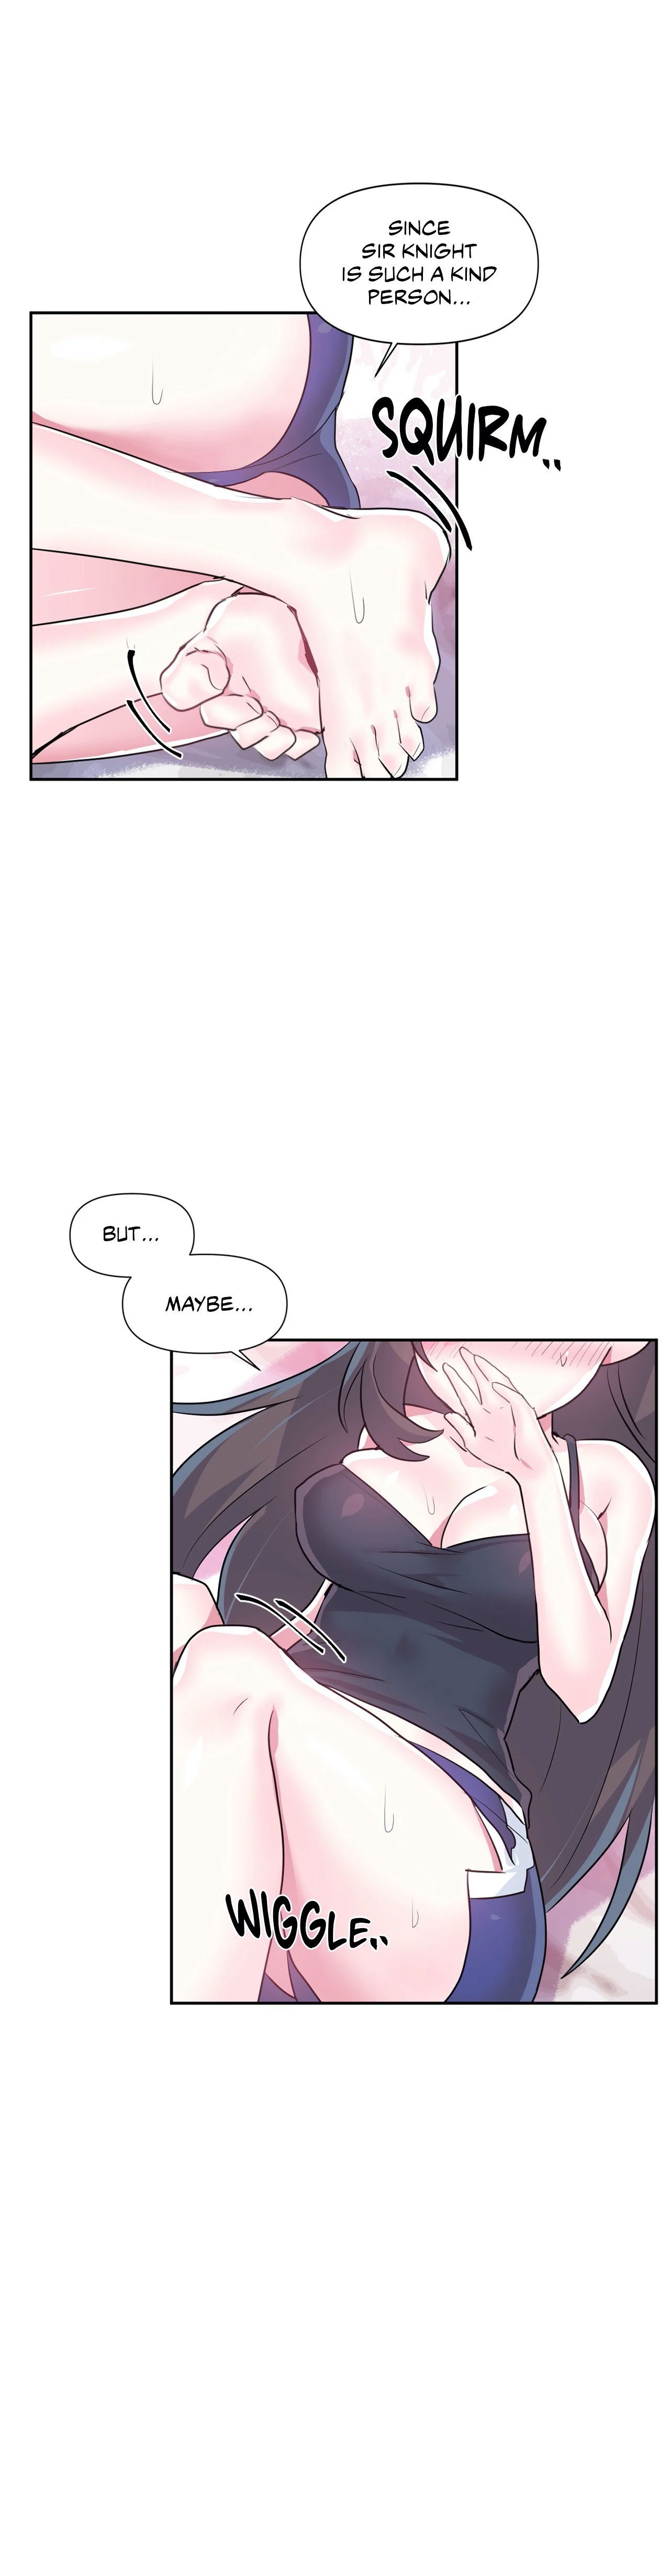 log-in-to-lust-a-land-chap-33-23